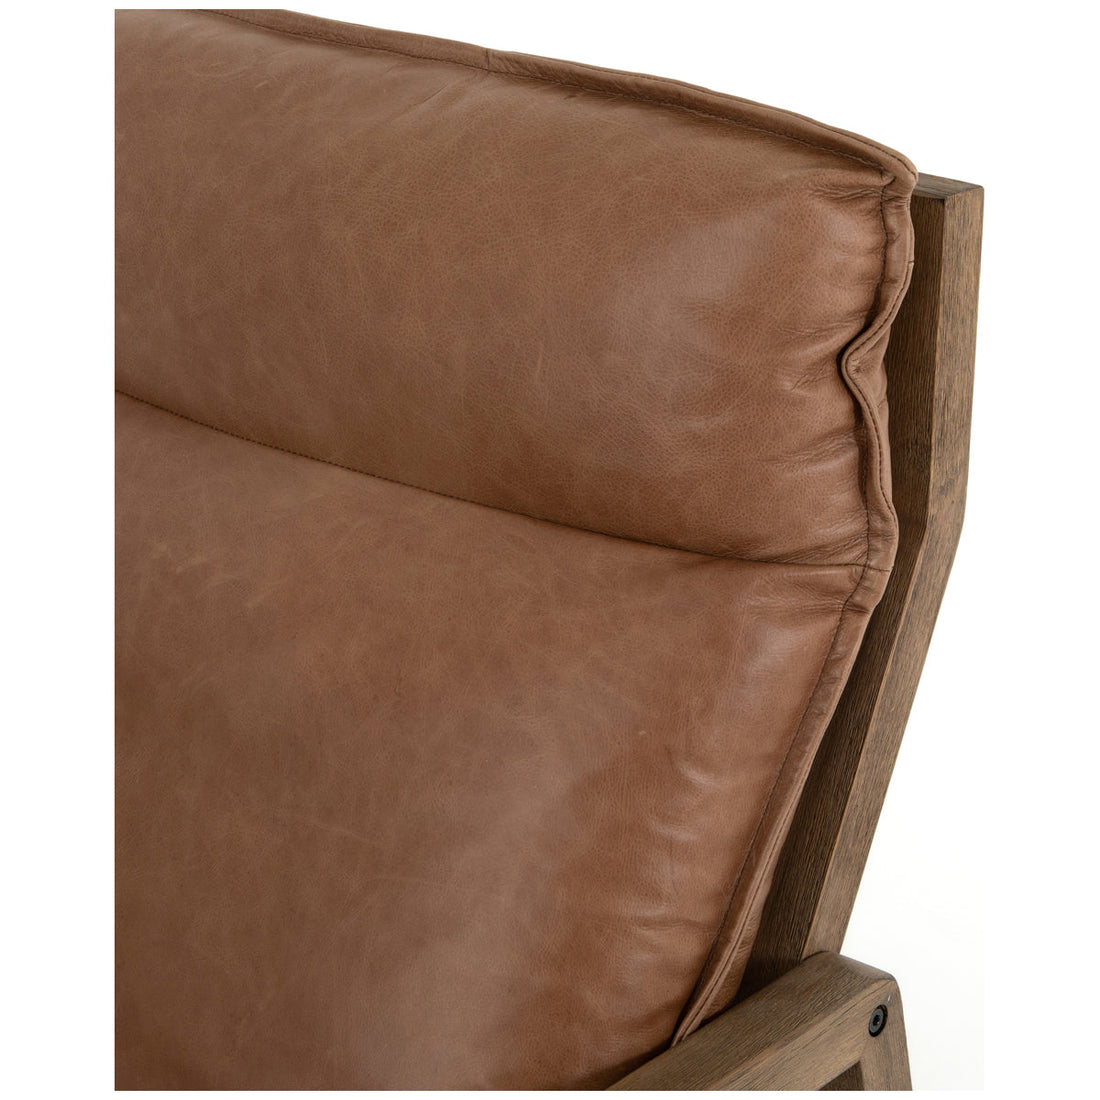 Four Hands Westgate Orion Leather Chair